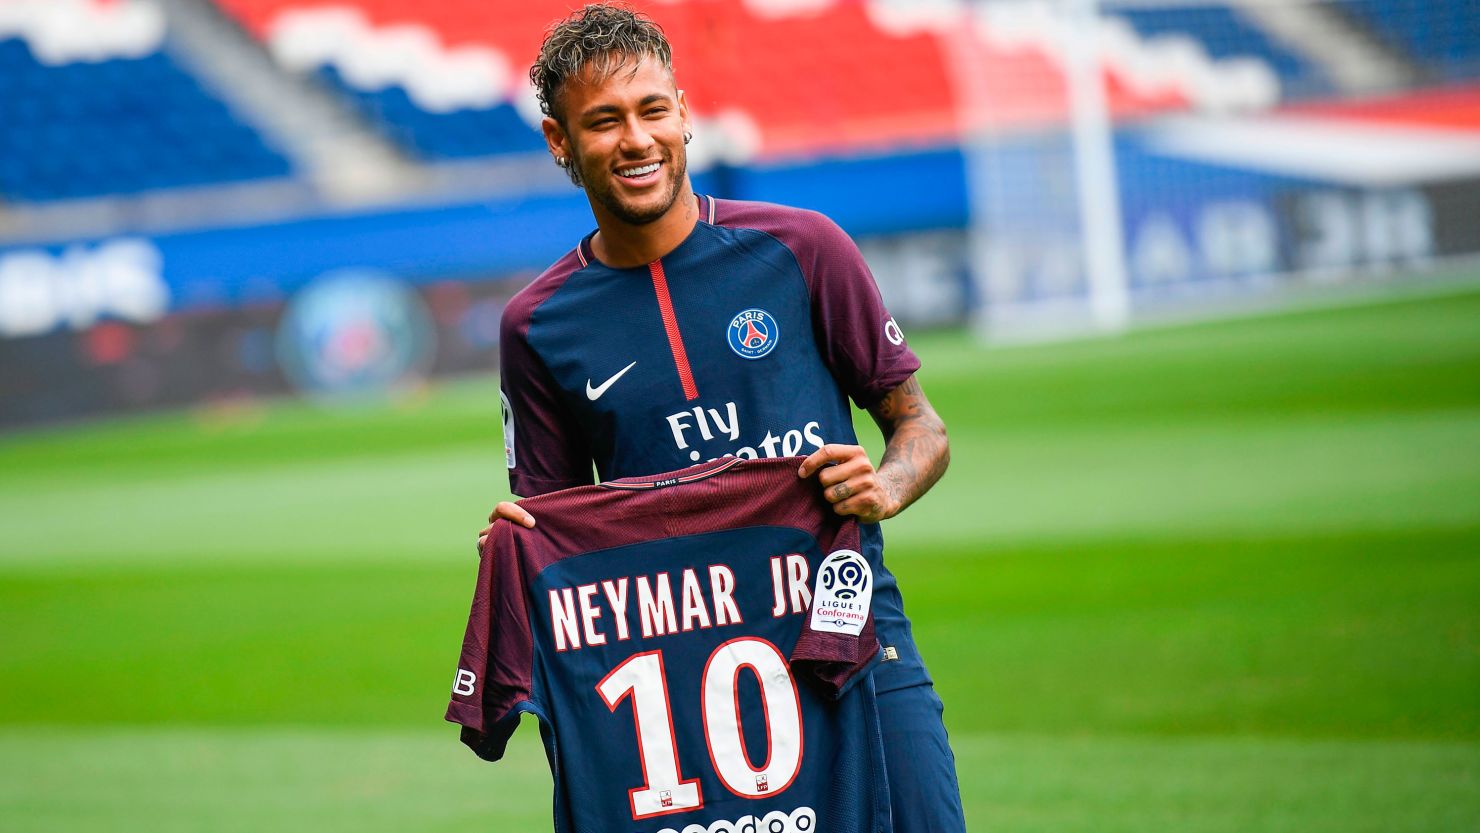 Spending on international transfer fees over the last decade, a study by world governing body FIFA said. The most spent on a player was Paris Saint-Germain's €222 million ($262.45 million) deal to bring Neymar (right) from Barcelona in 2017.